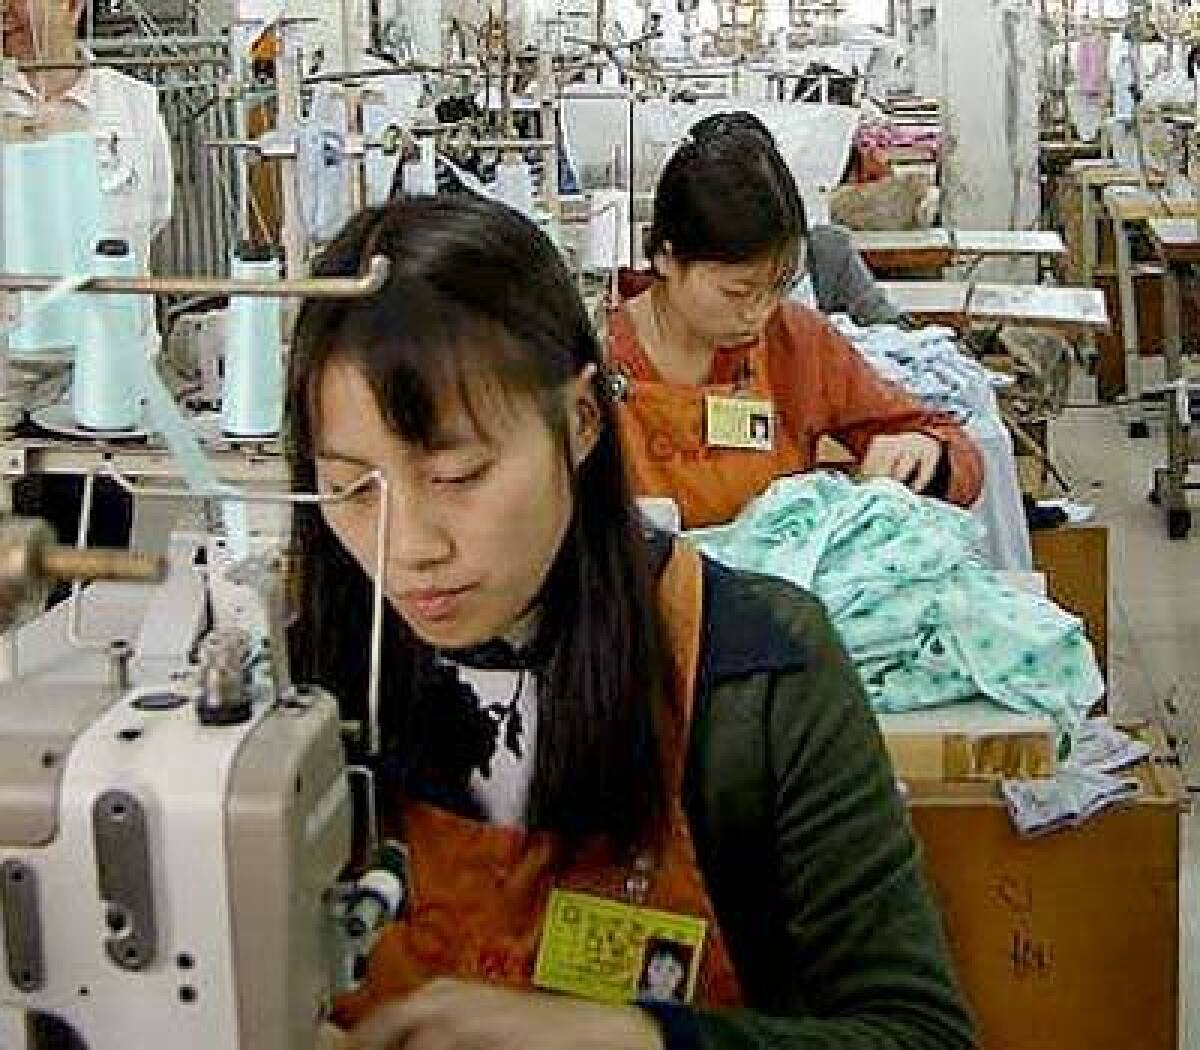 Two Chinese garment workers, Ping Qiu-xia, 20, and Yu Jian-fen, 22, both from Sichuan province, work on an order for Wal-Mart in Germany at the Gladpeer Garment Factory in the southern Chinese city of Dongguan, about 60 miles northwest of Hong Kong.